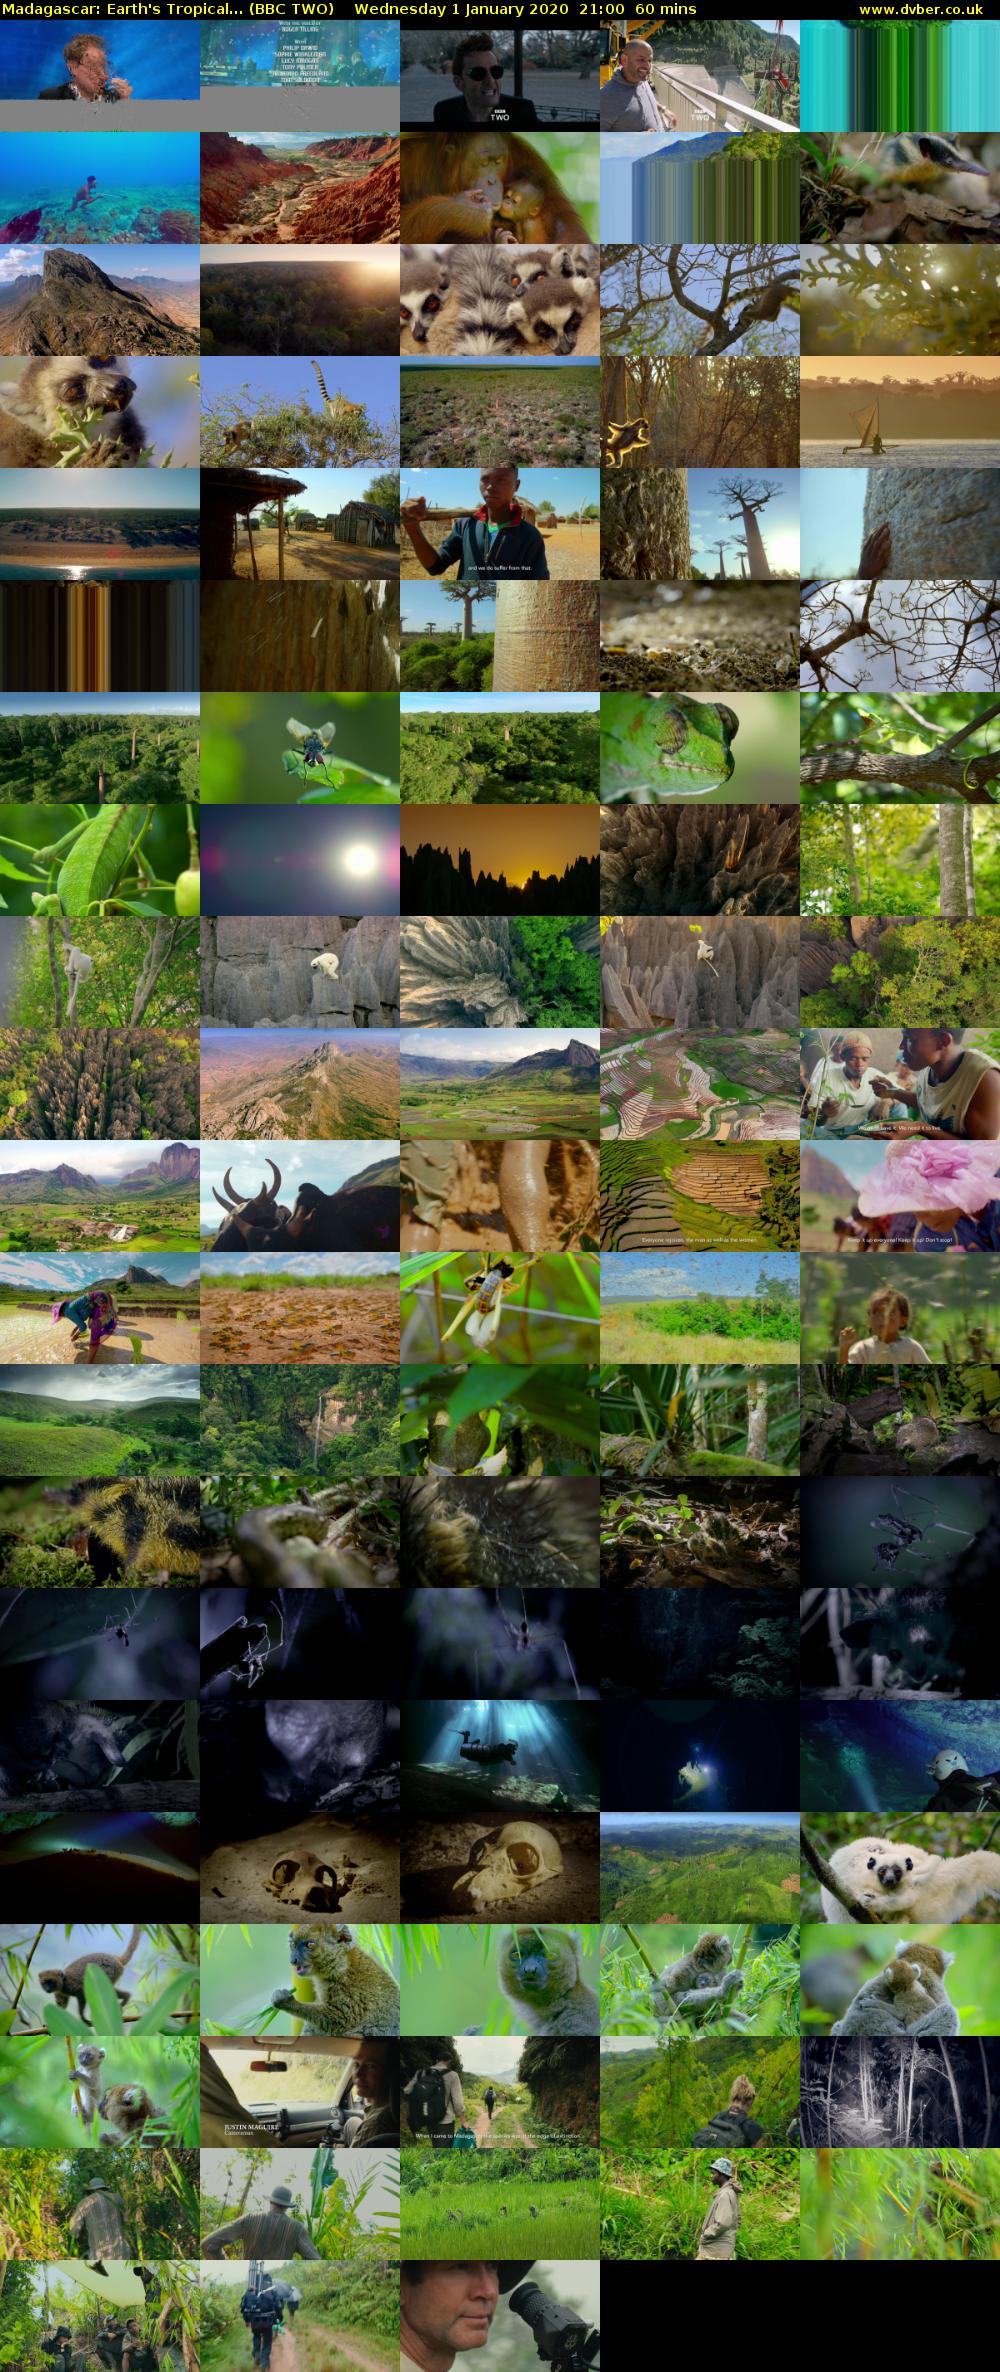 Madagascar: Earth's Tropical... (BBC TWO) Wednesday 1 January 2020 21:00 - 22:00